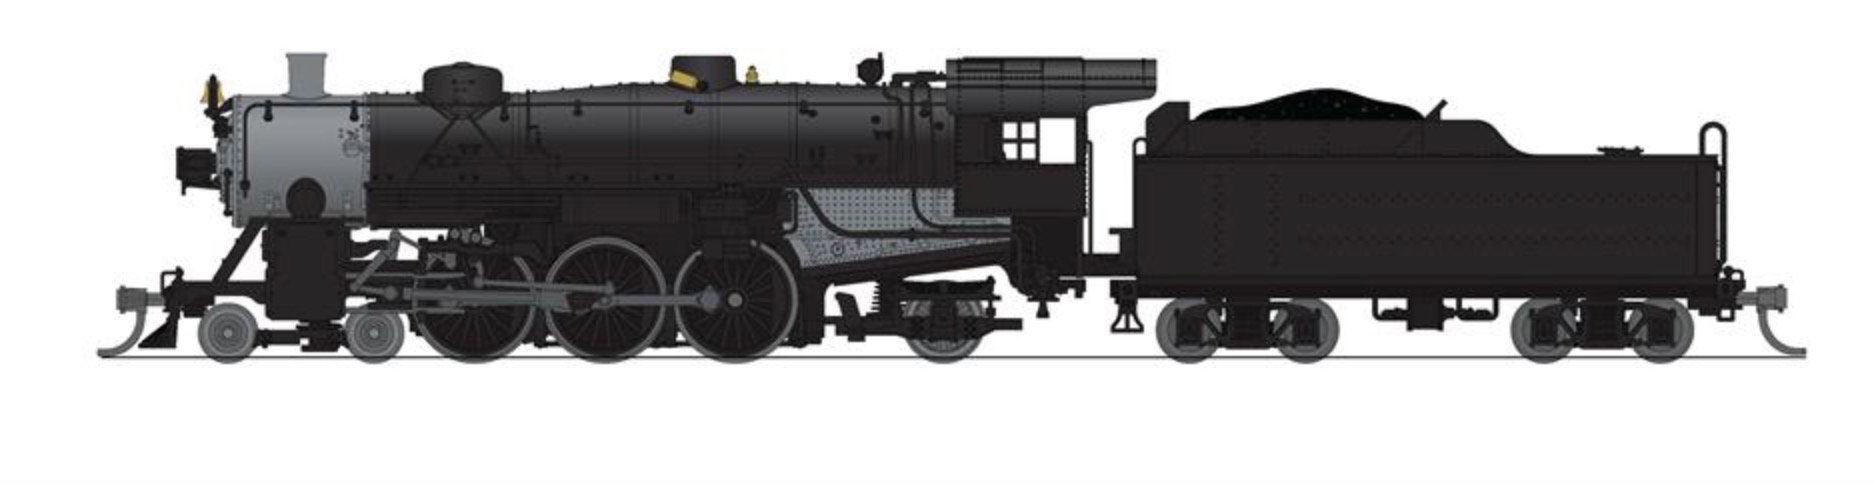 N Scale - Broadway Limited - 8080 - Locomotive, Steam, 4-6-2, USRA Light Pacific - Painted/Unlettered